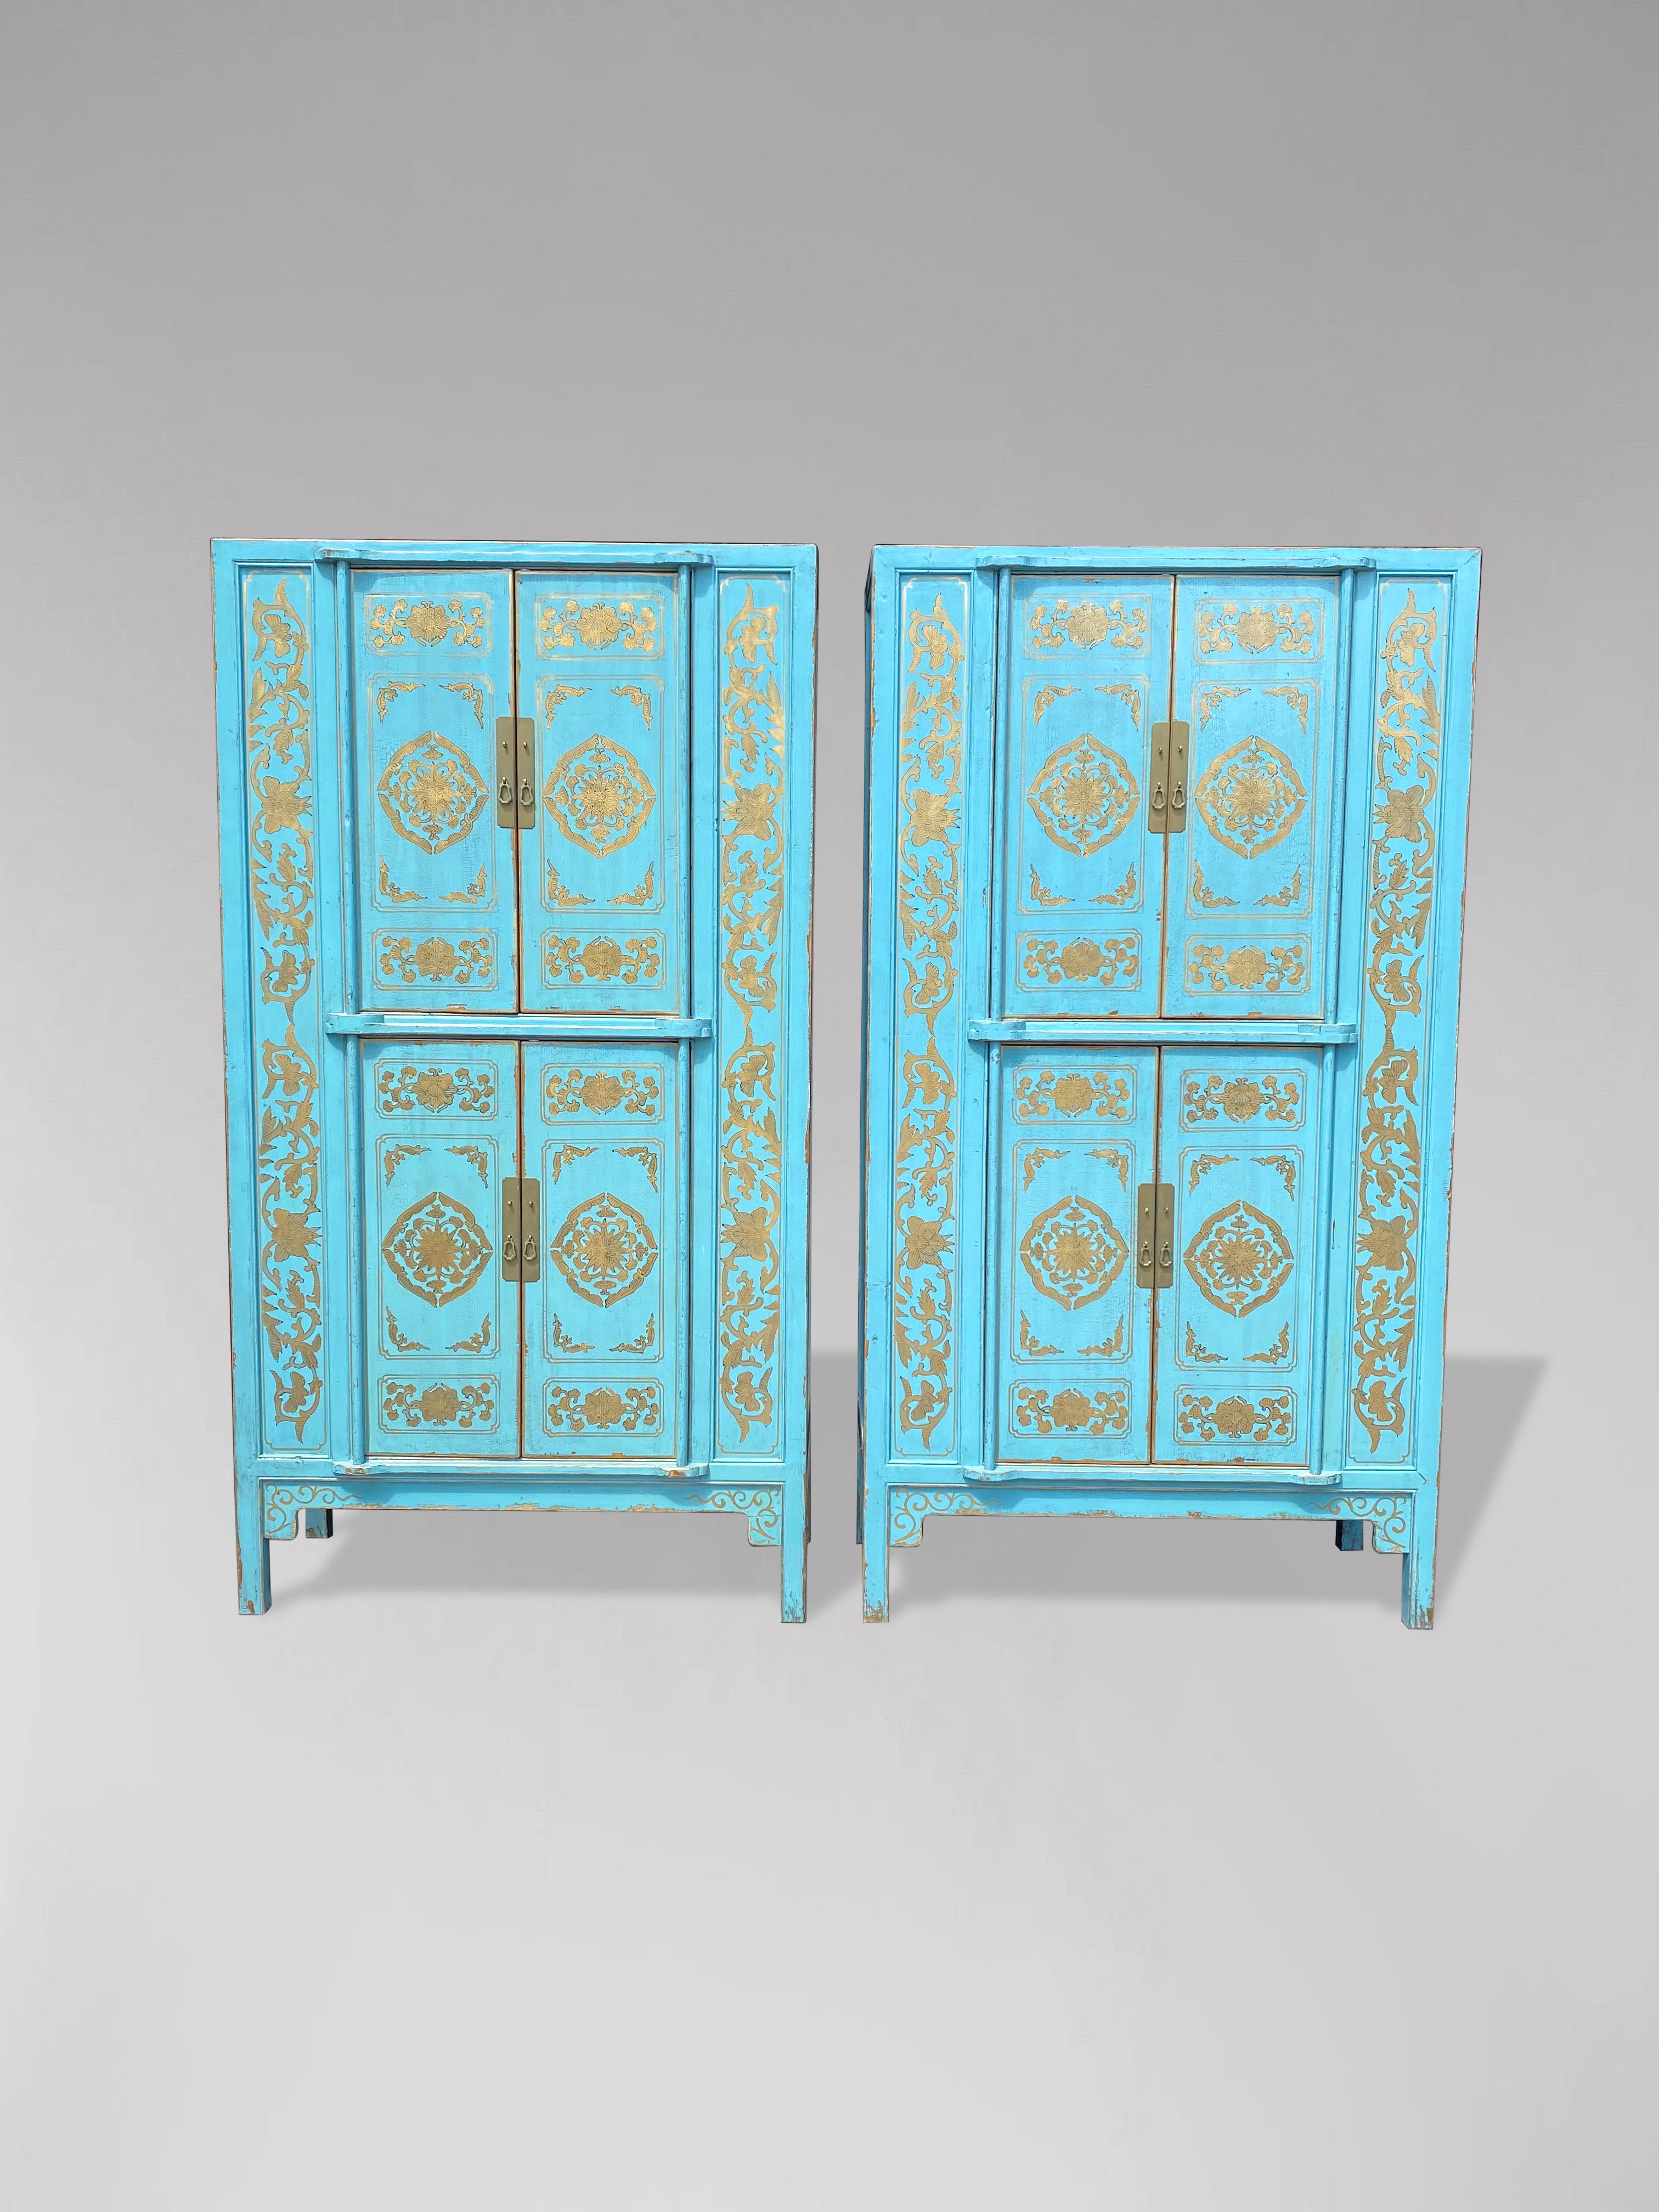 Pair of late 20th century turquoise painted with gold motifs tall cupboards. Each cupboard with 4 doors enclosing a shelf and plenty of storage. Four large compartments to each cupboard offering plenty of storage space. The doors are richly